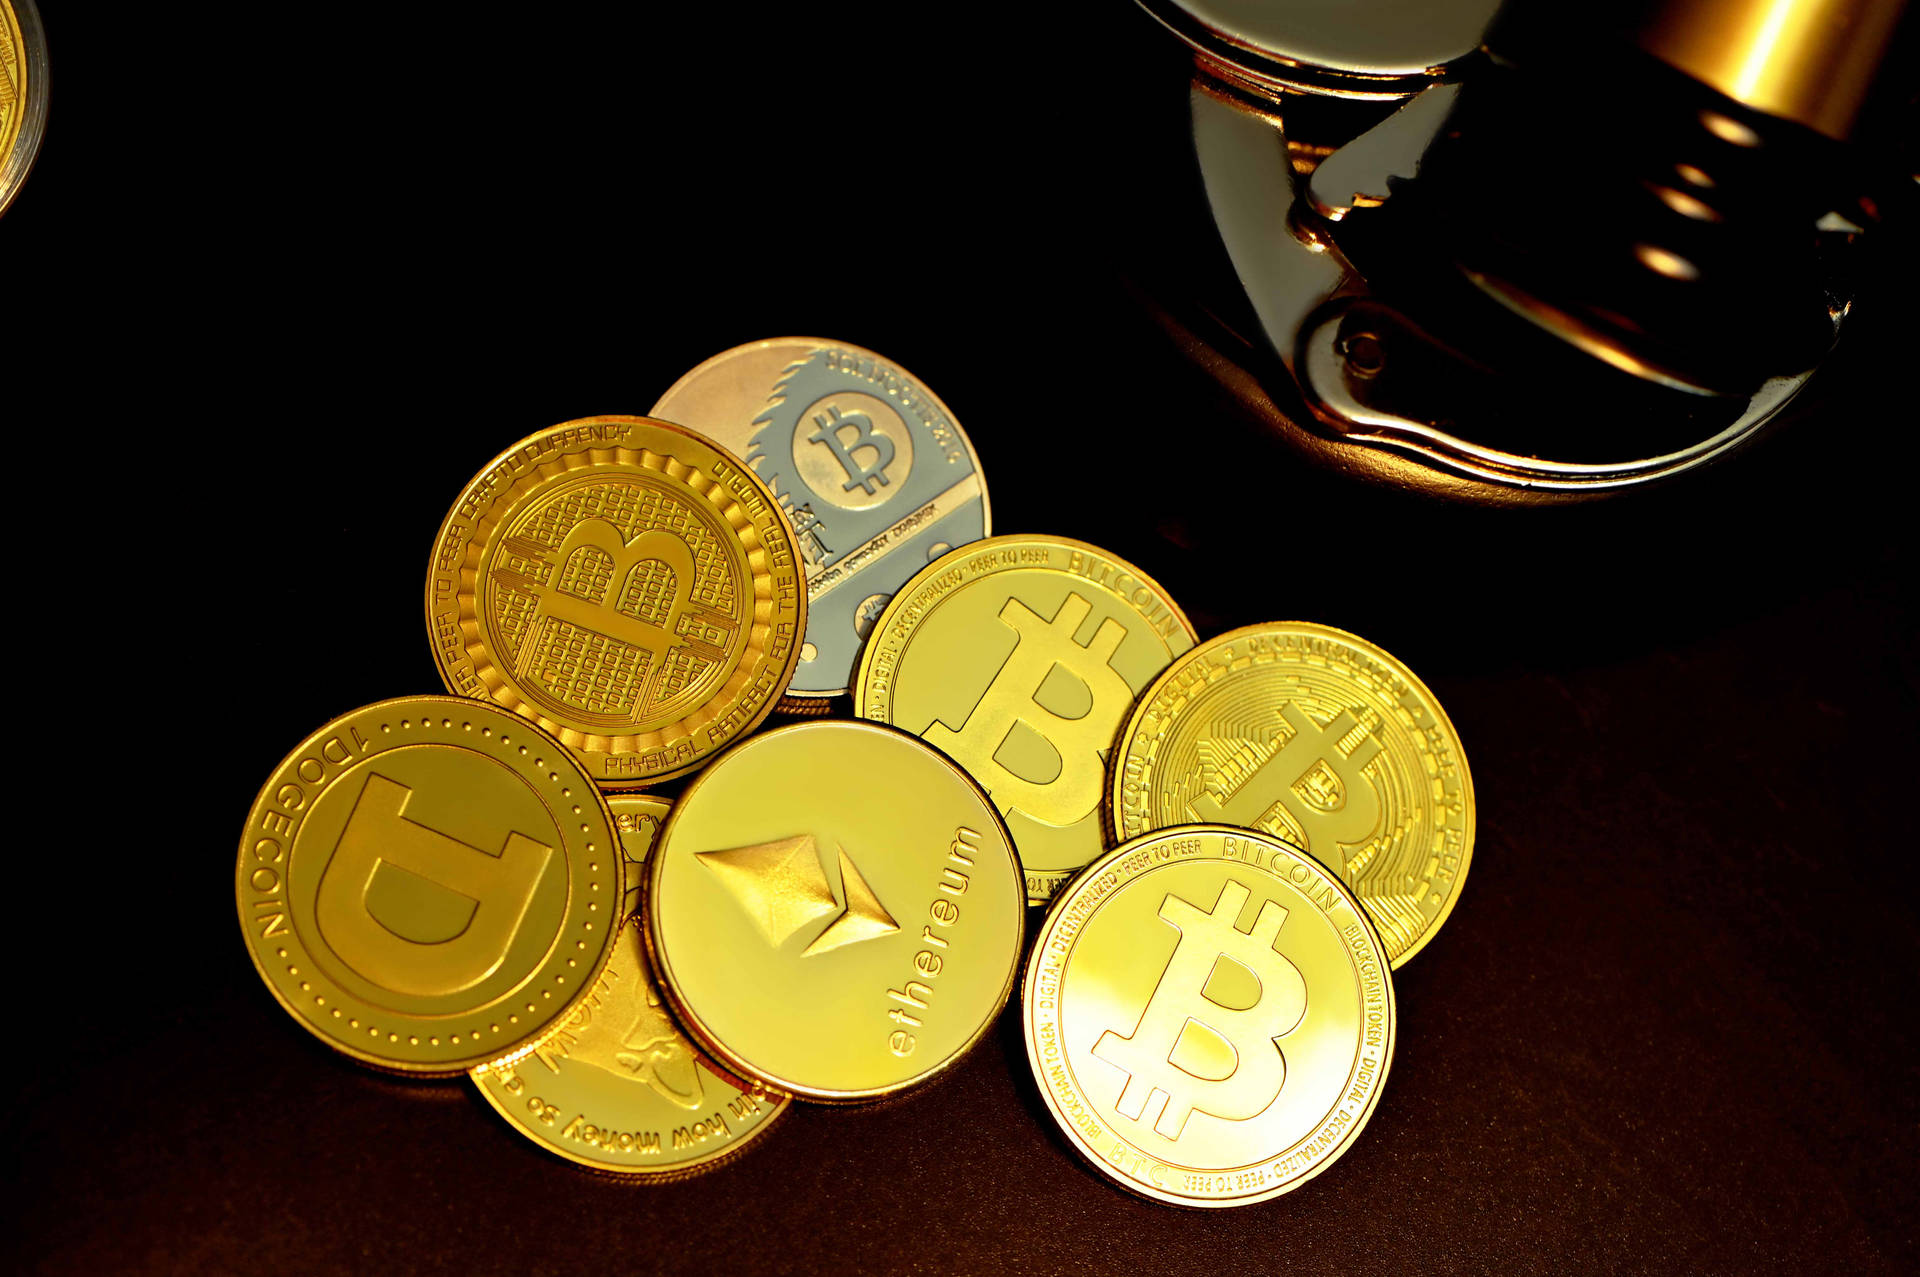 Shiny Cryptocurrency Coins